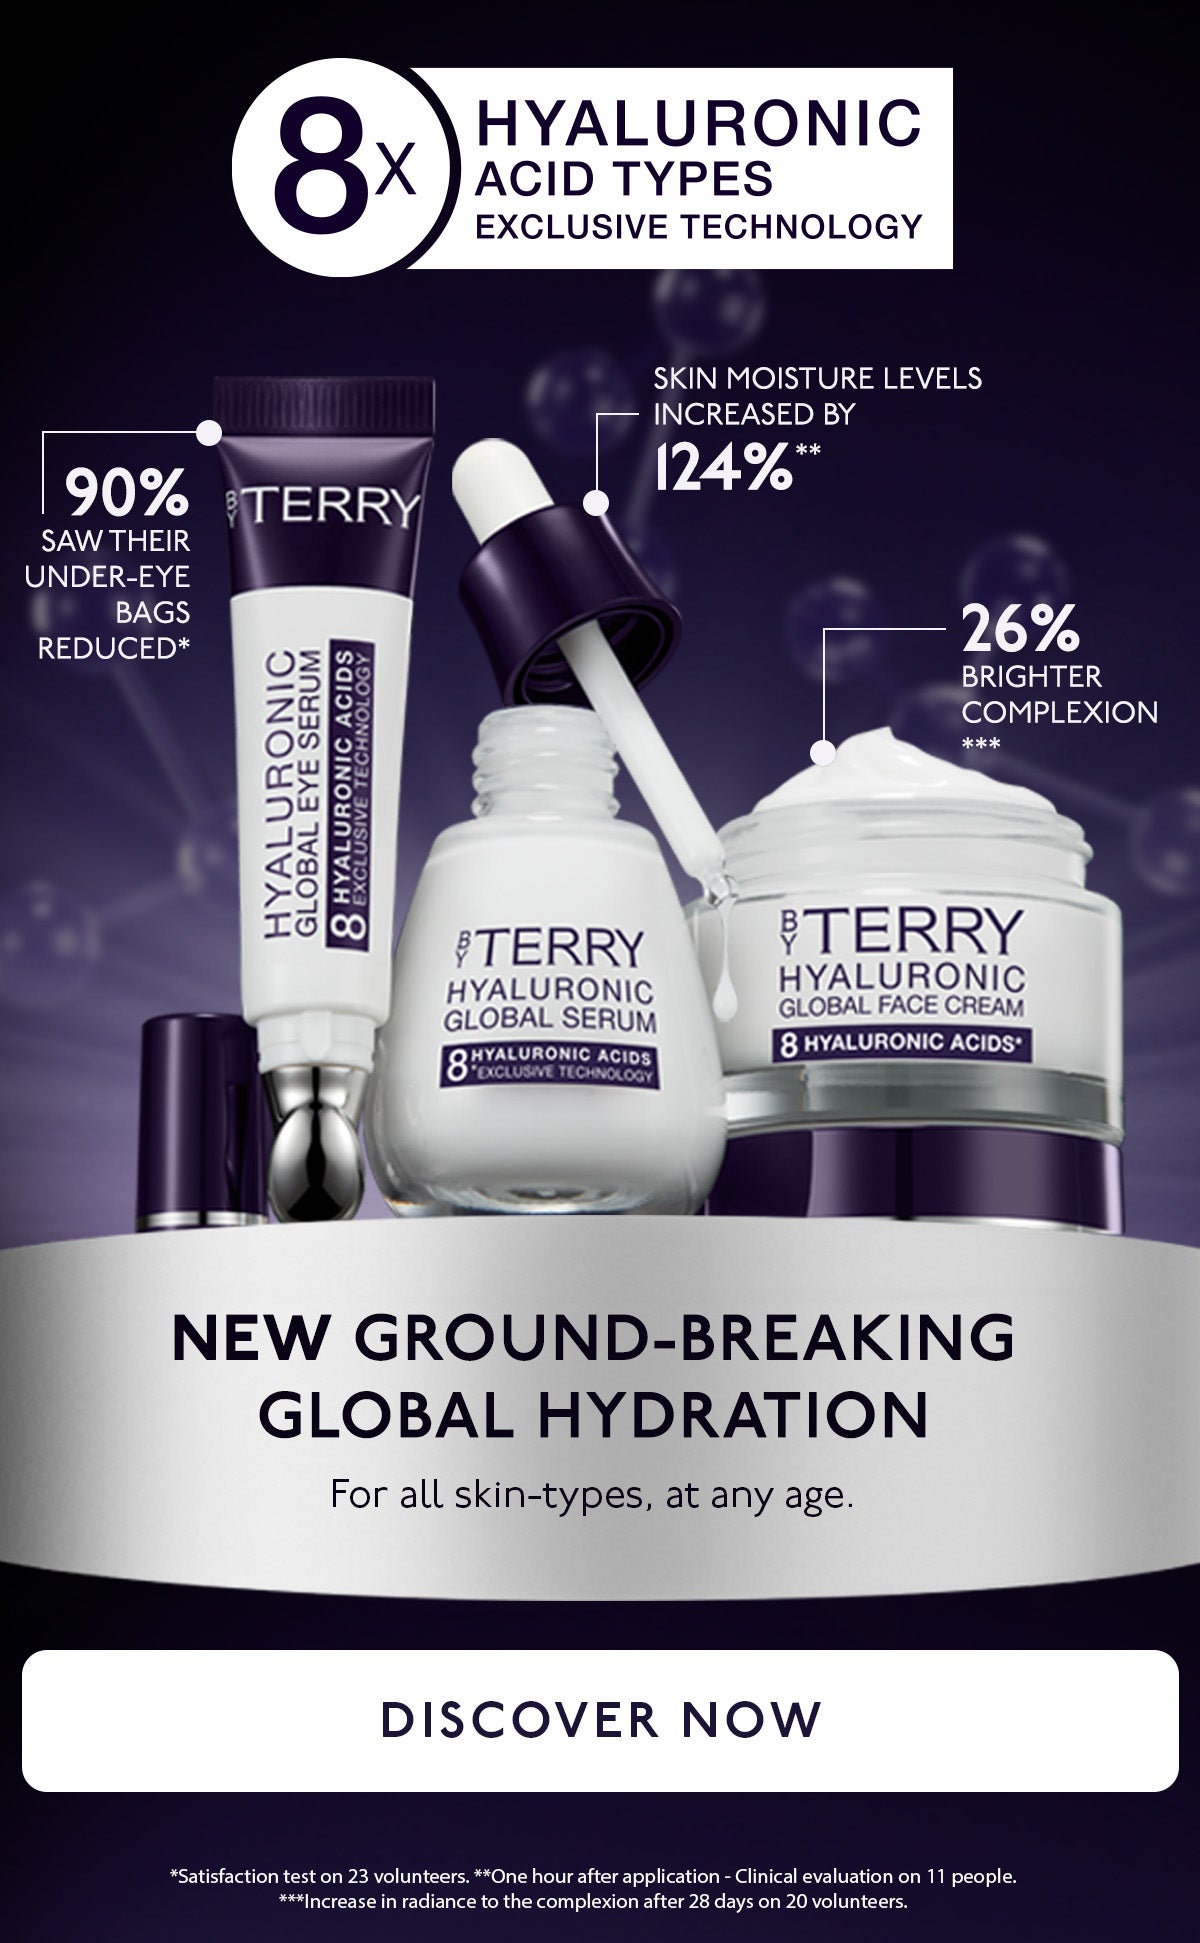 NEW GROUND-BREAKING GLOBAL HYDRATION